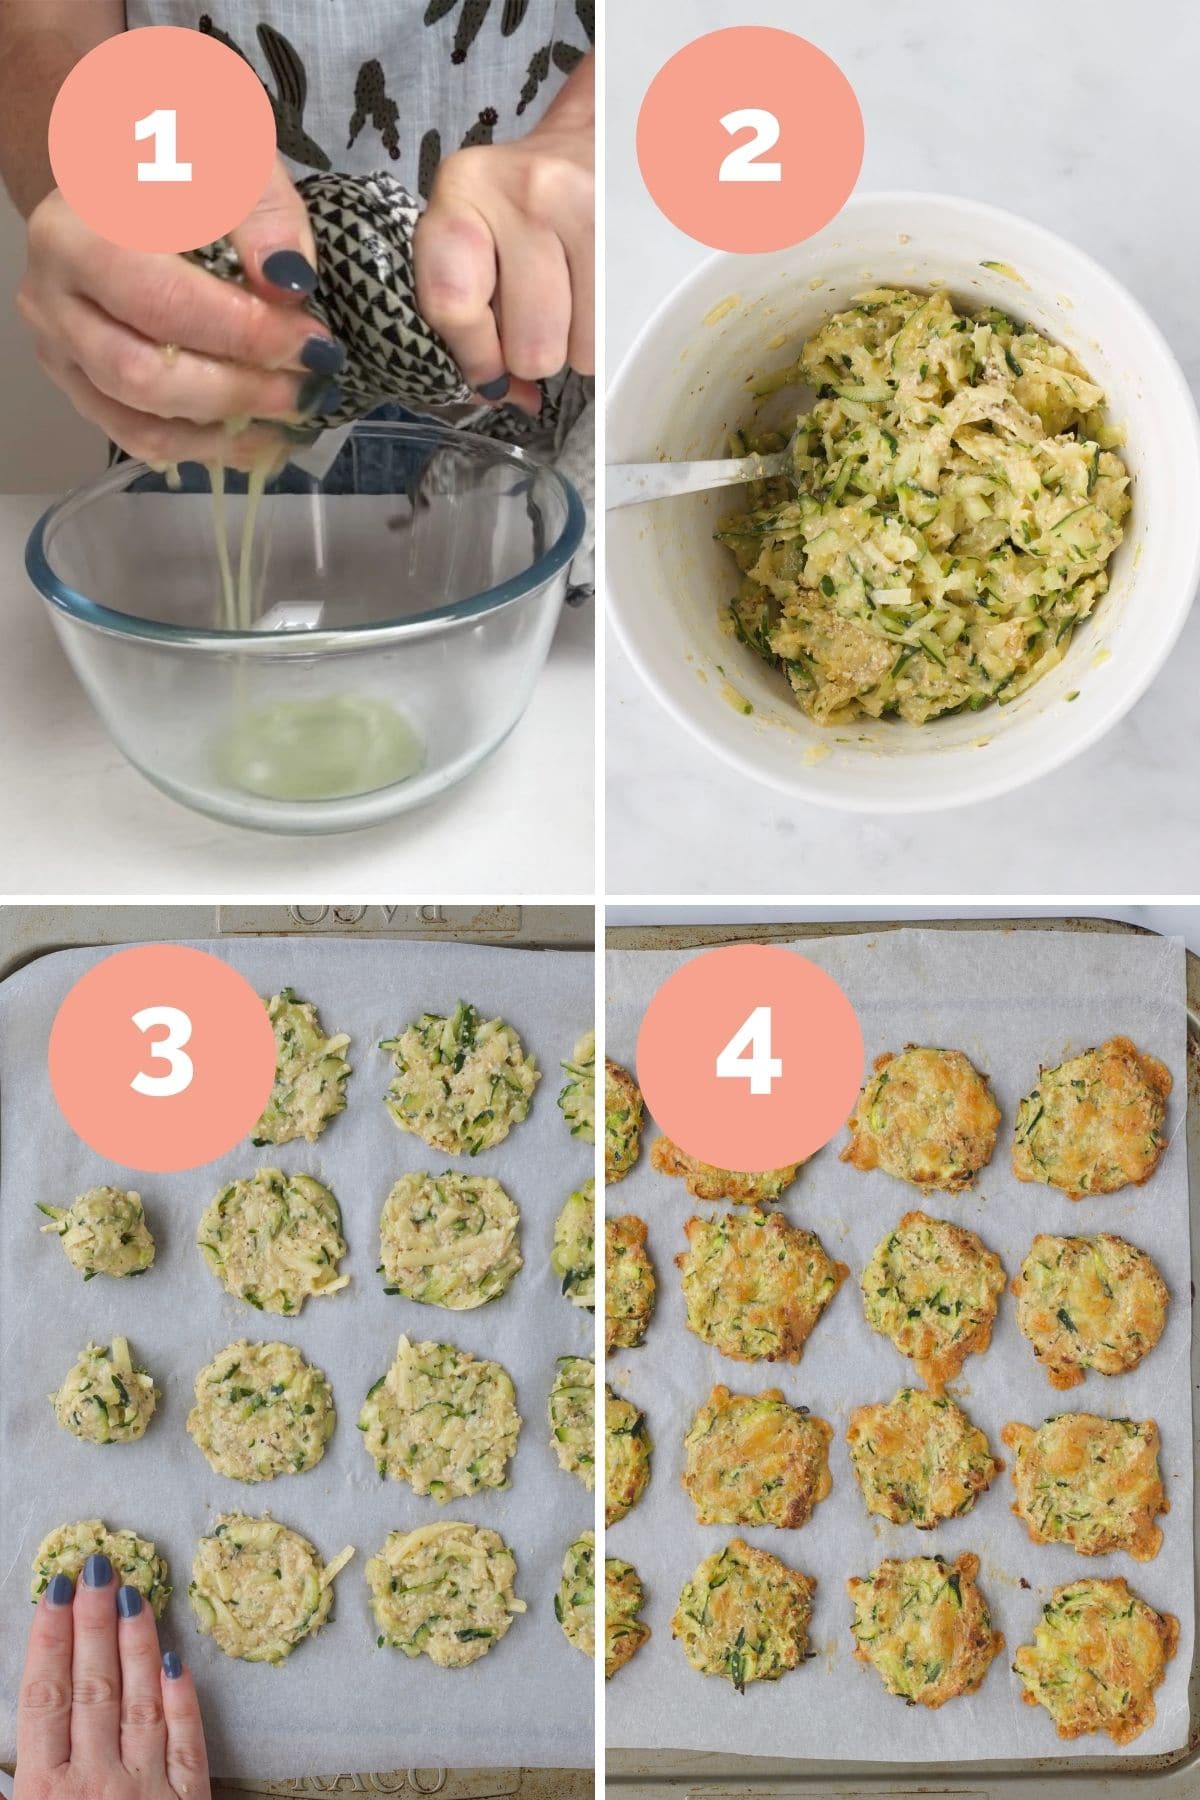 Collage of 4 Images Showing How to Make Zucchini Bites (1) Squeeze Liquid from zucchini 2) Mix Ingredients Together 3) Form Bites 4) Bake